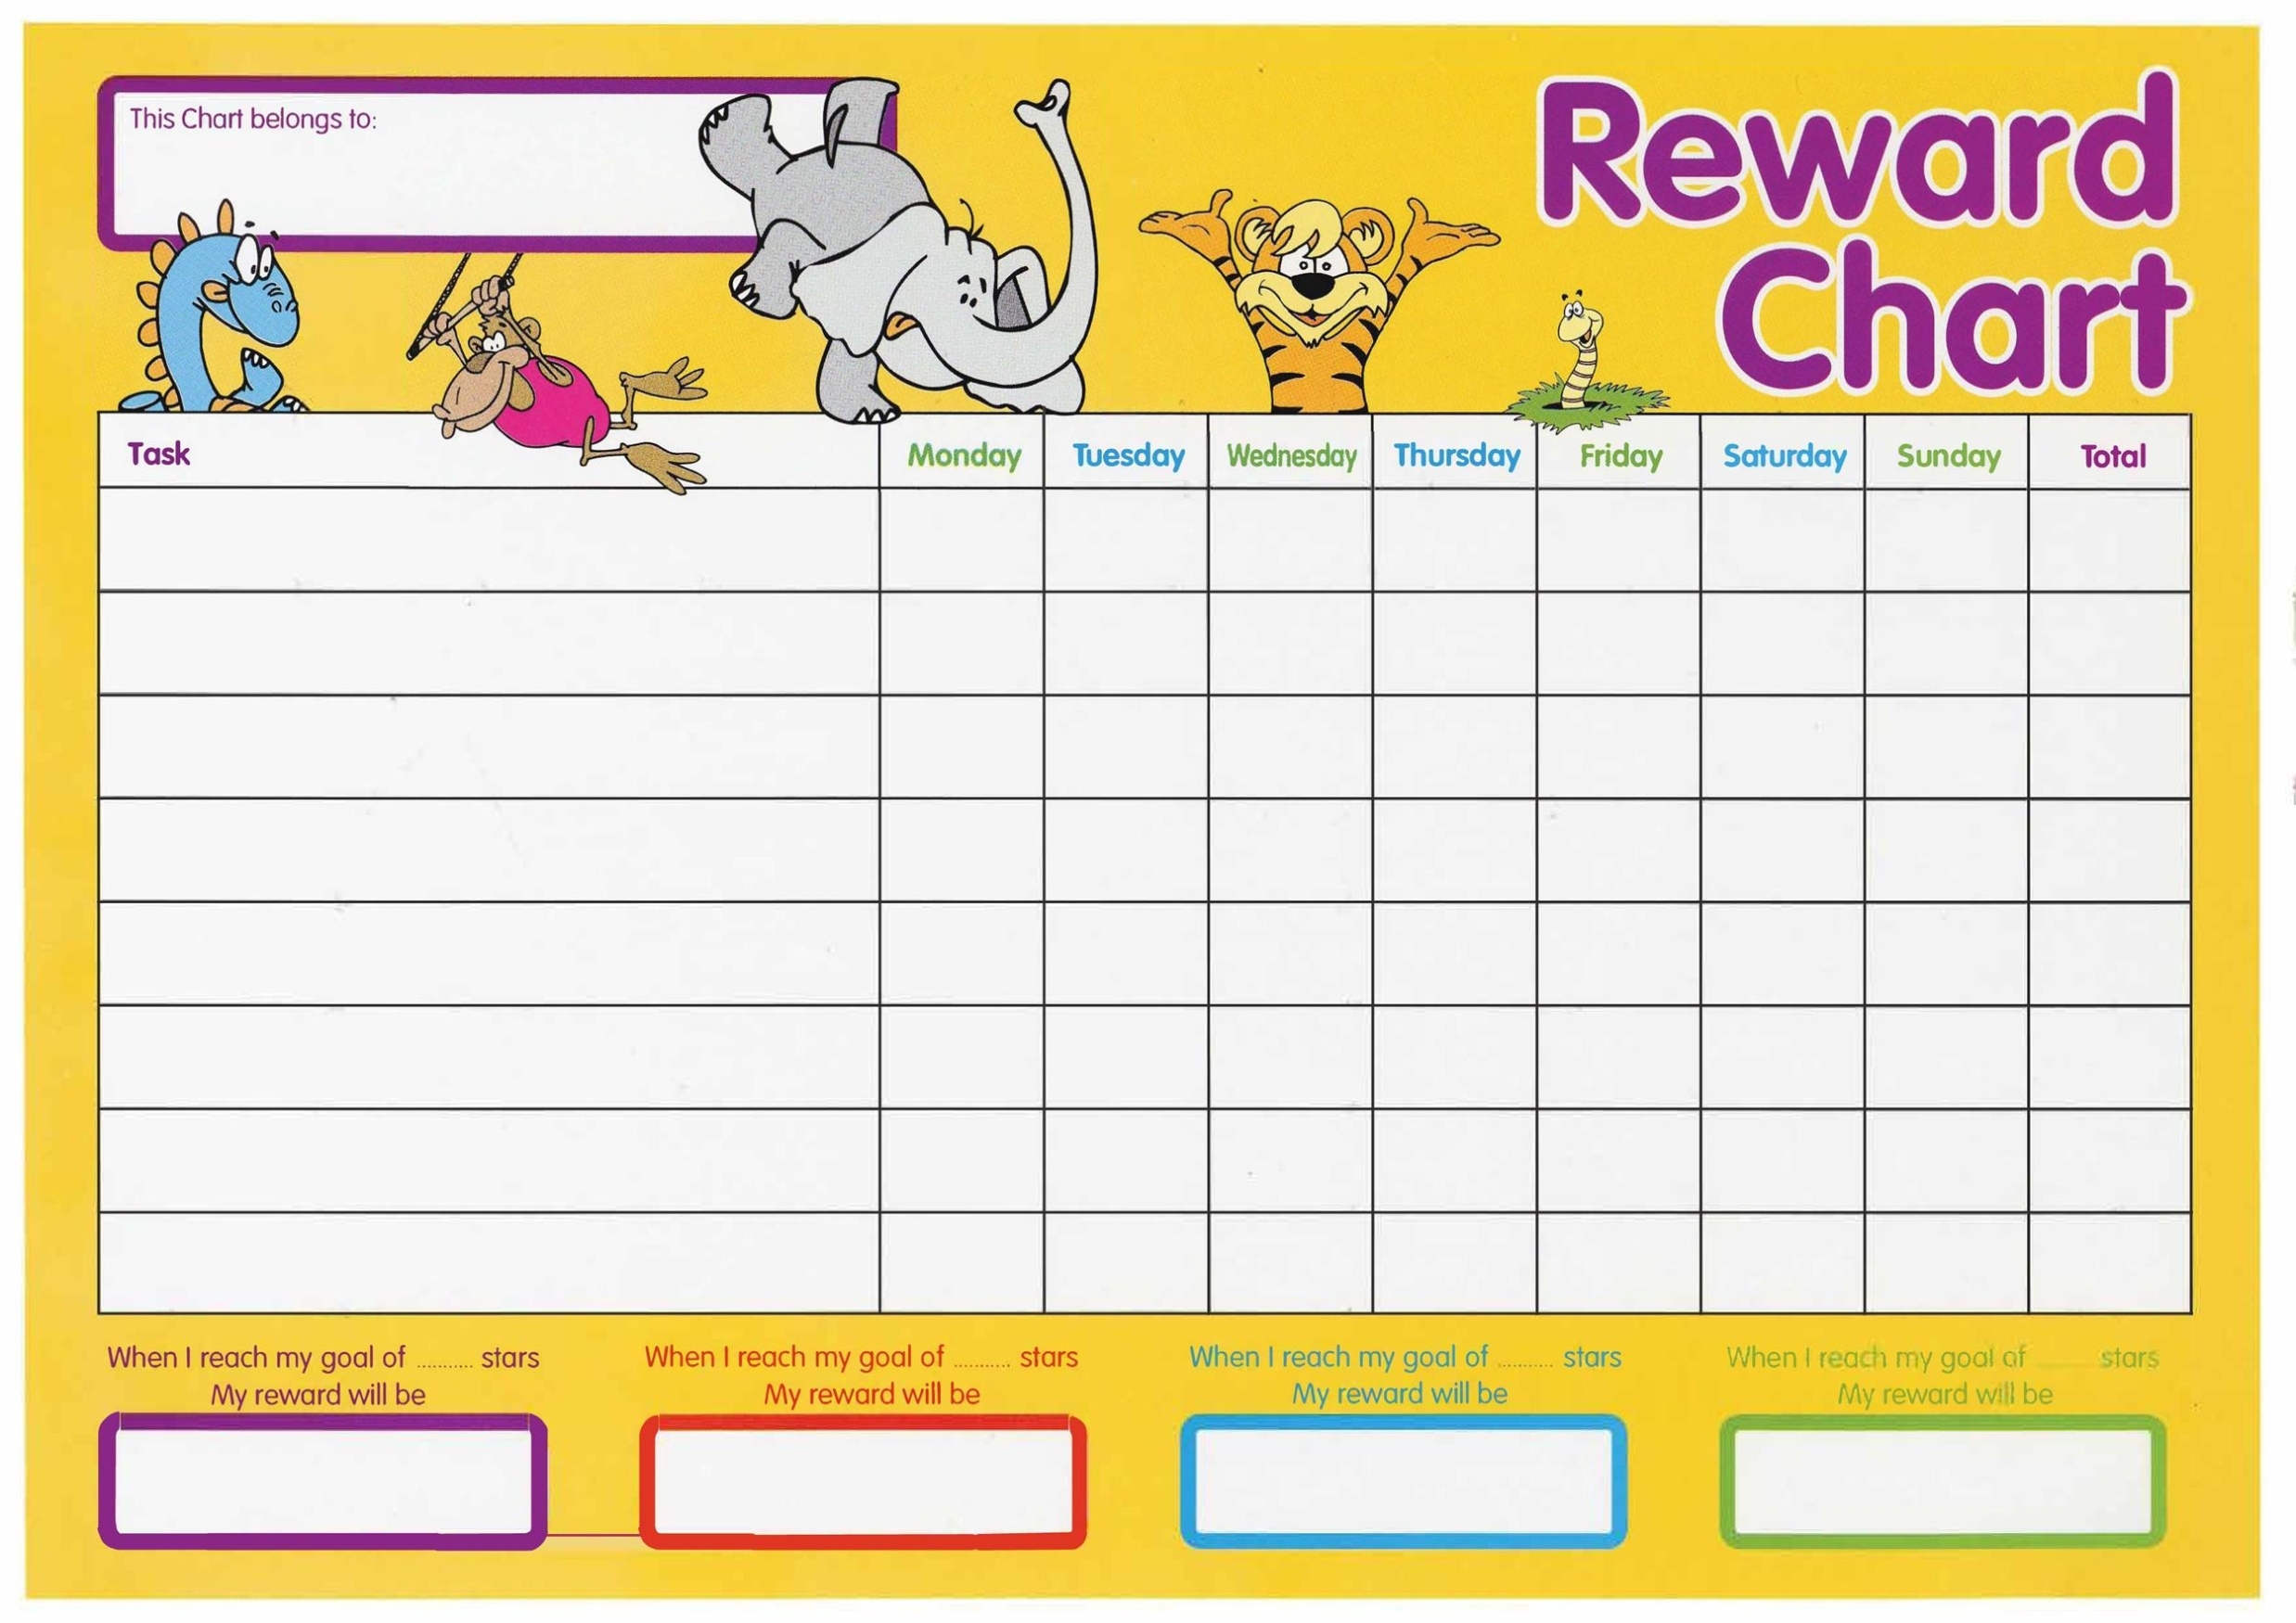 Template For Reward Chart - Get Free Templates within Reward Chart Template Word